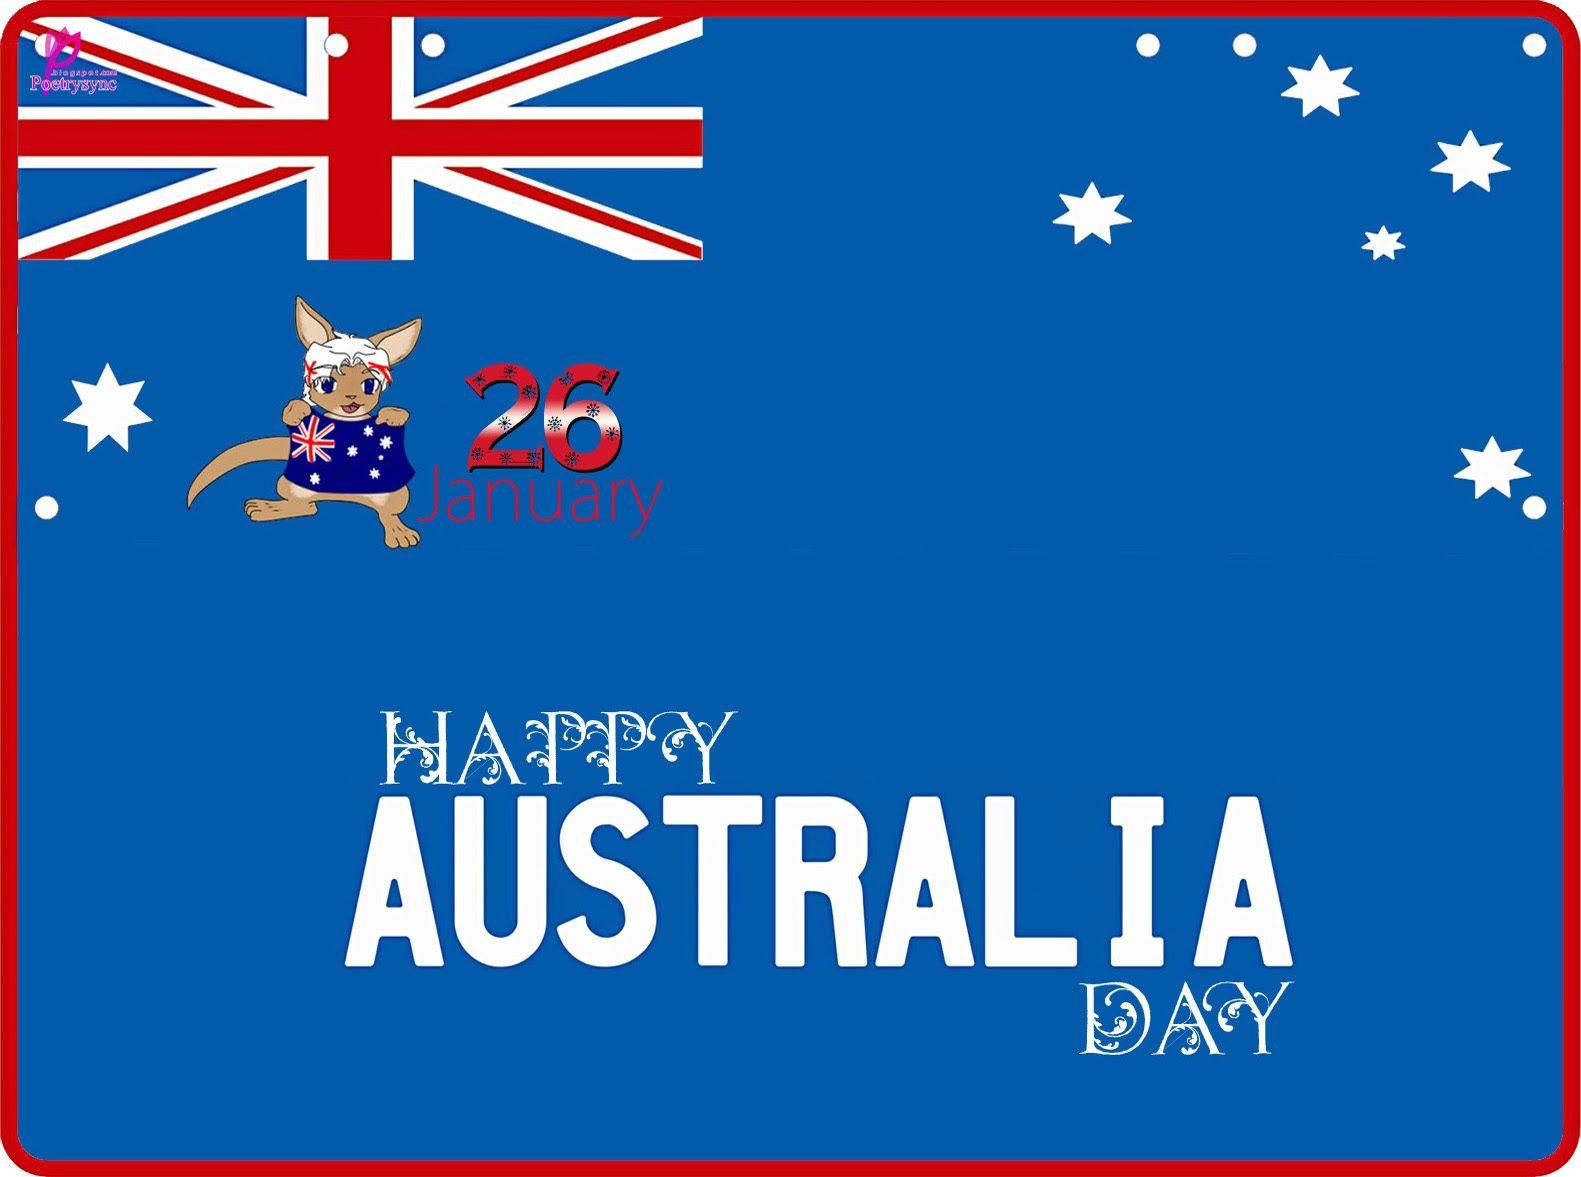 Happy Australia day 2016 Image, Quotes, Greetings, Wishes